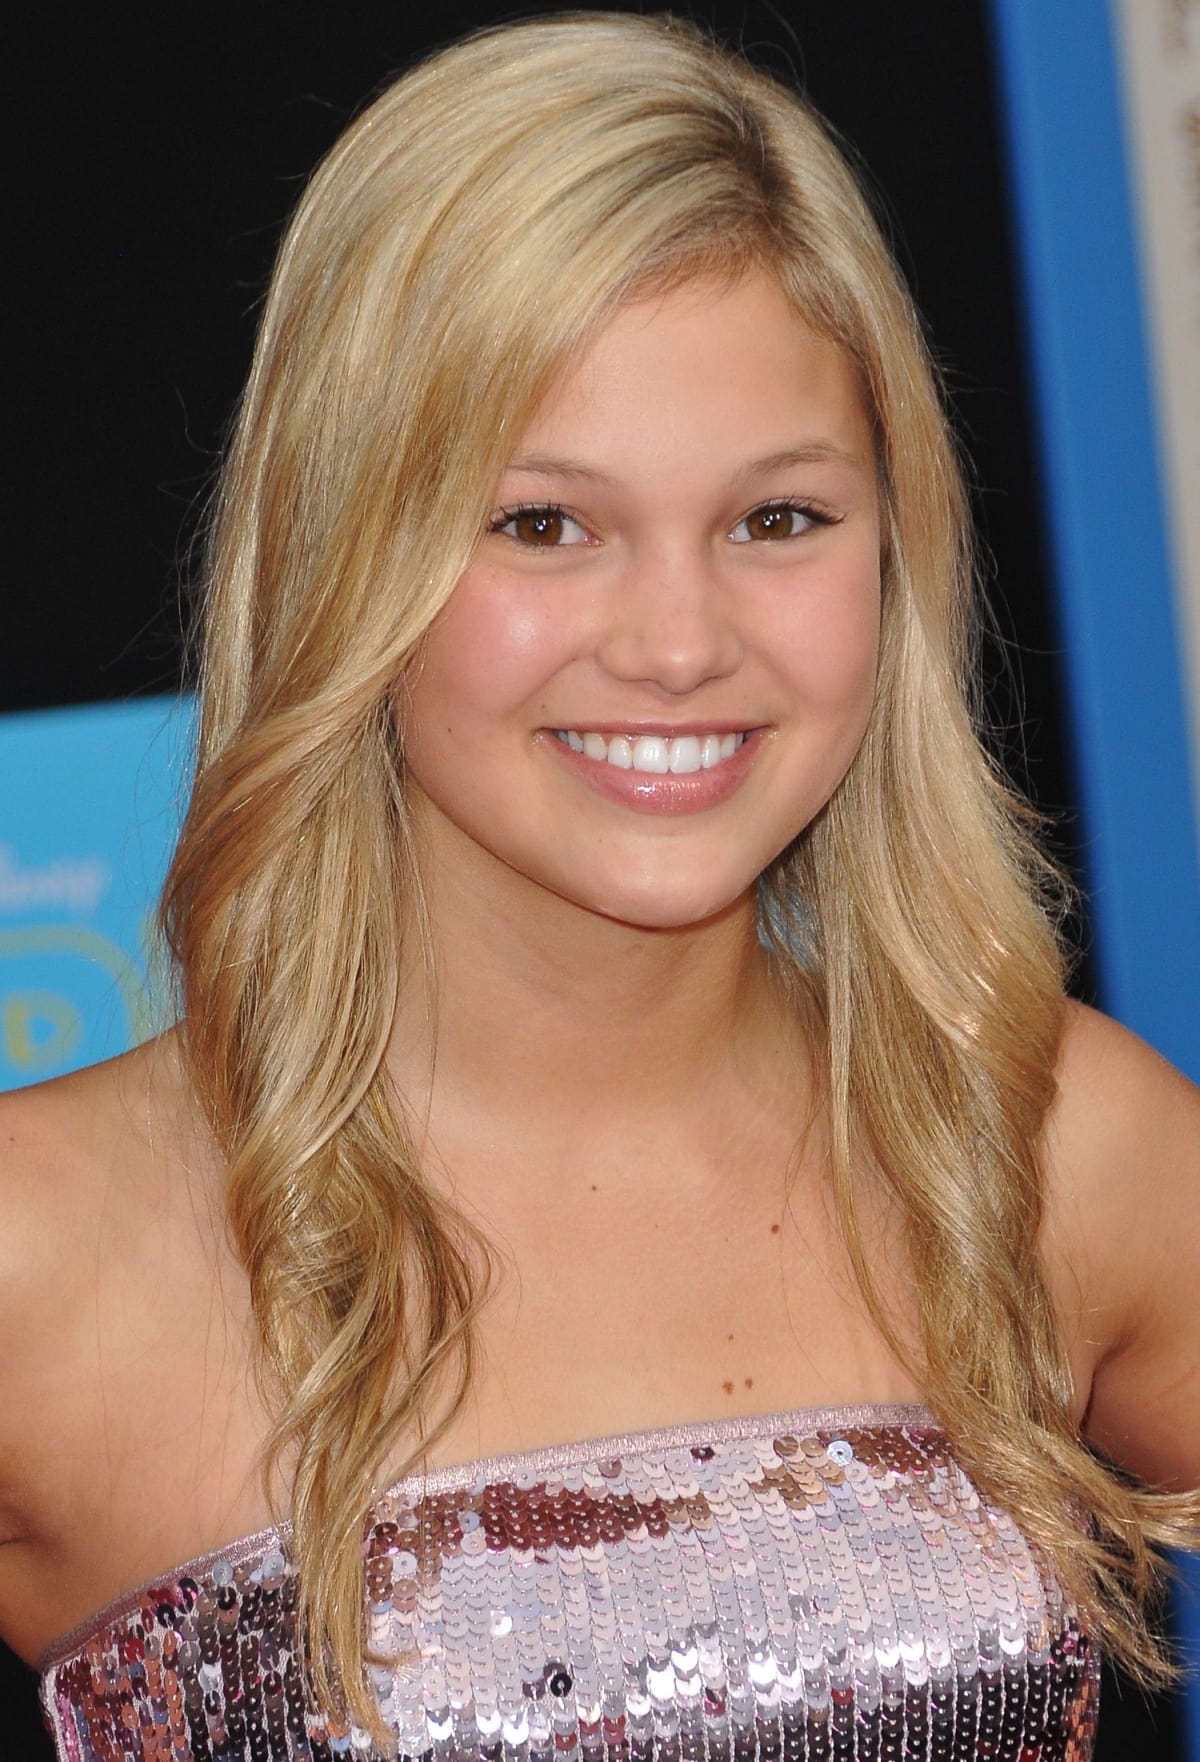 Olivia Holt attending the premiere of Prom